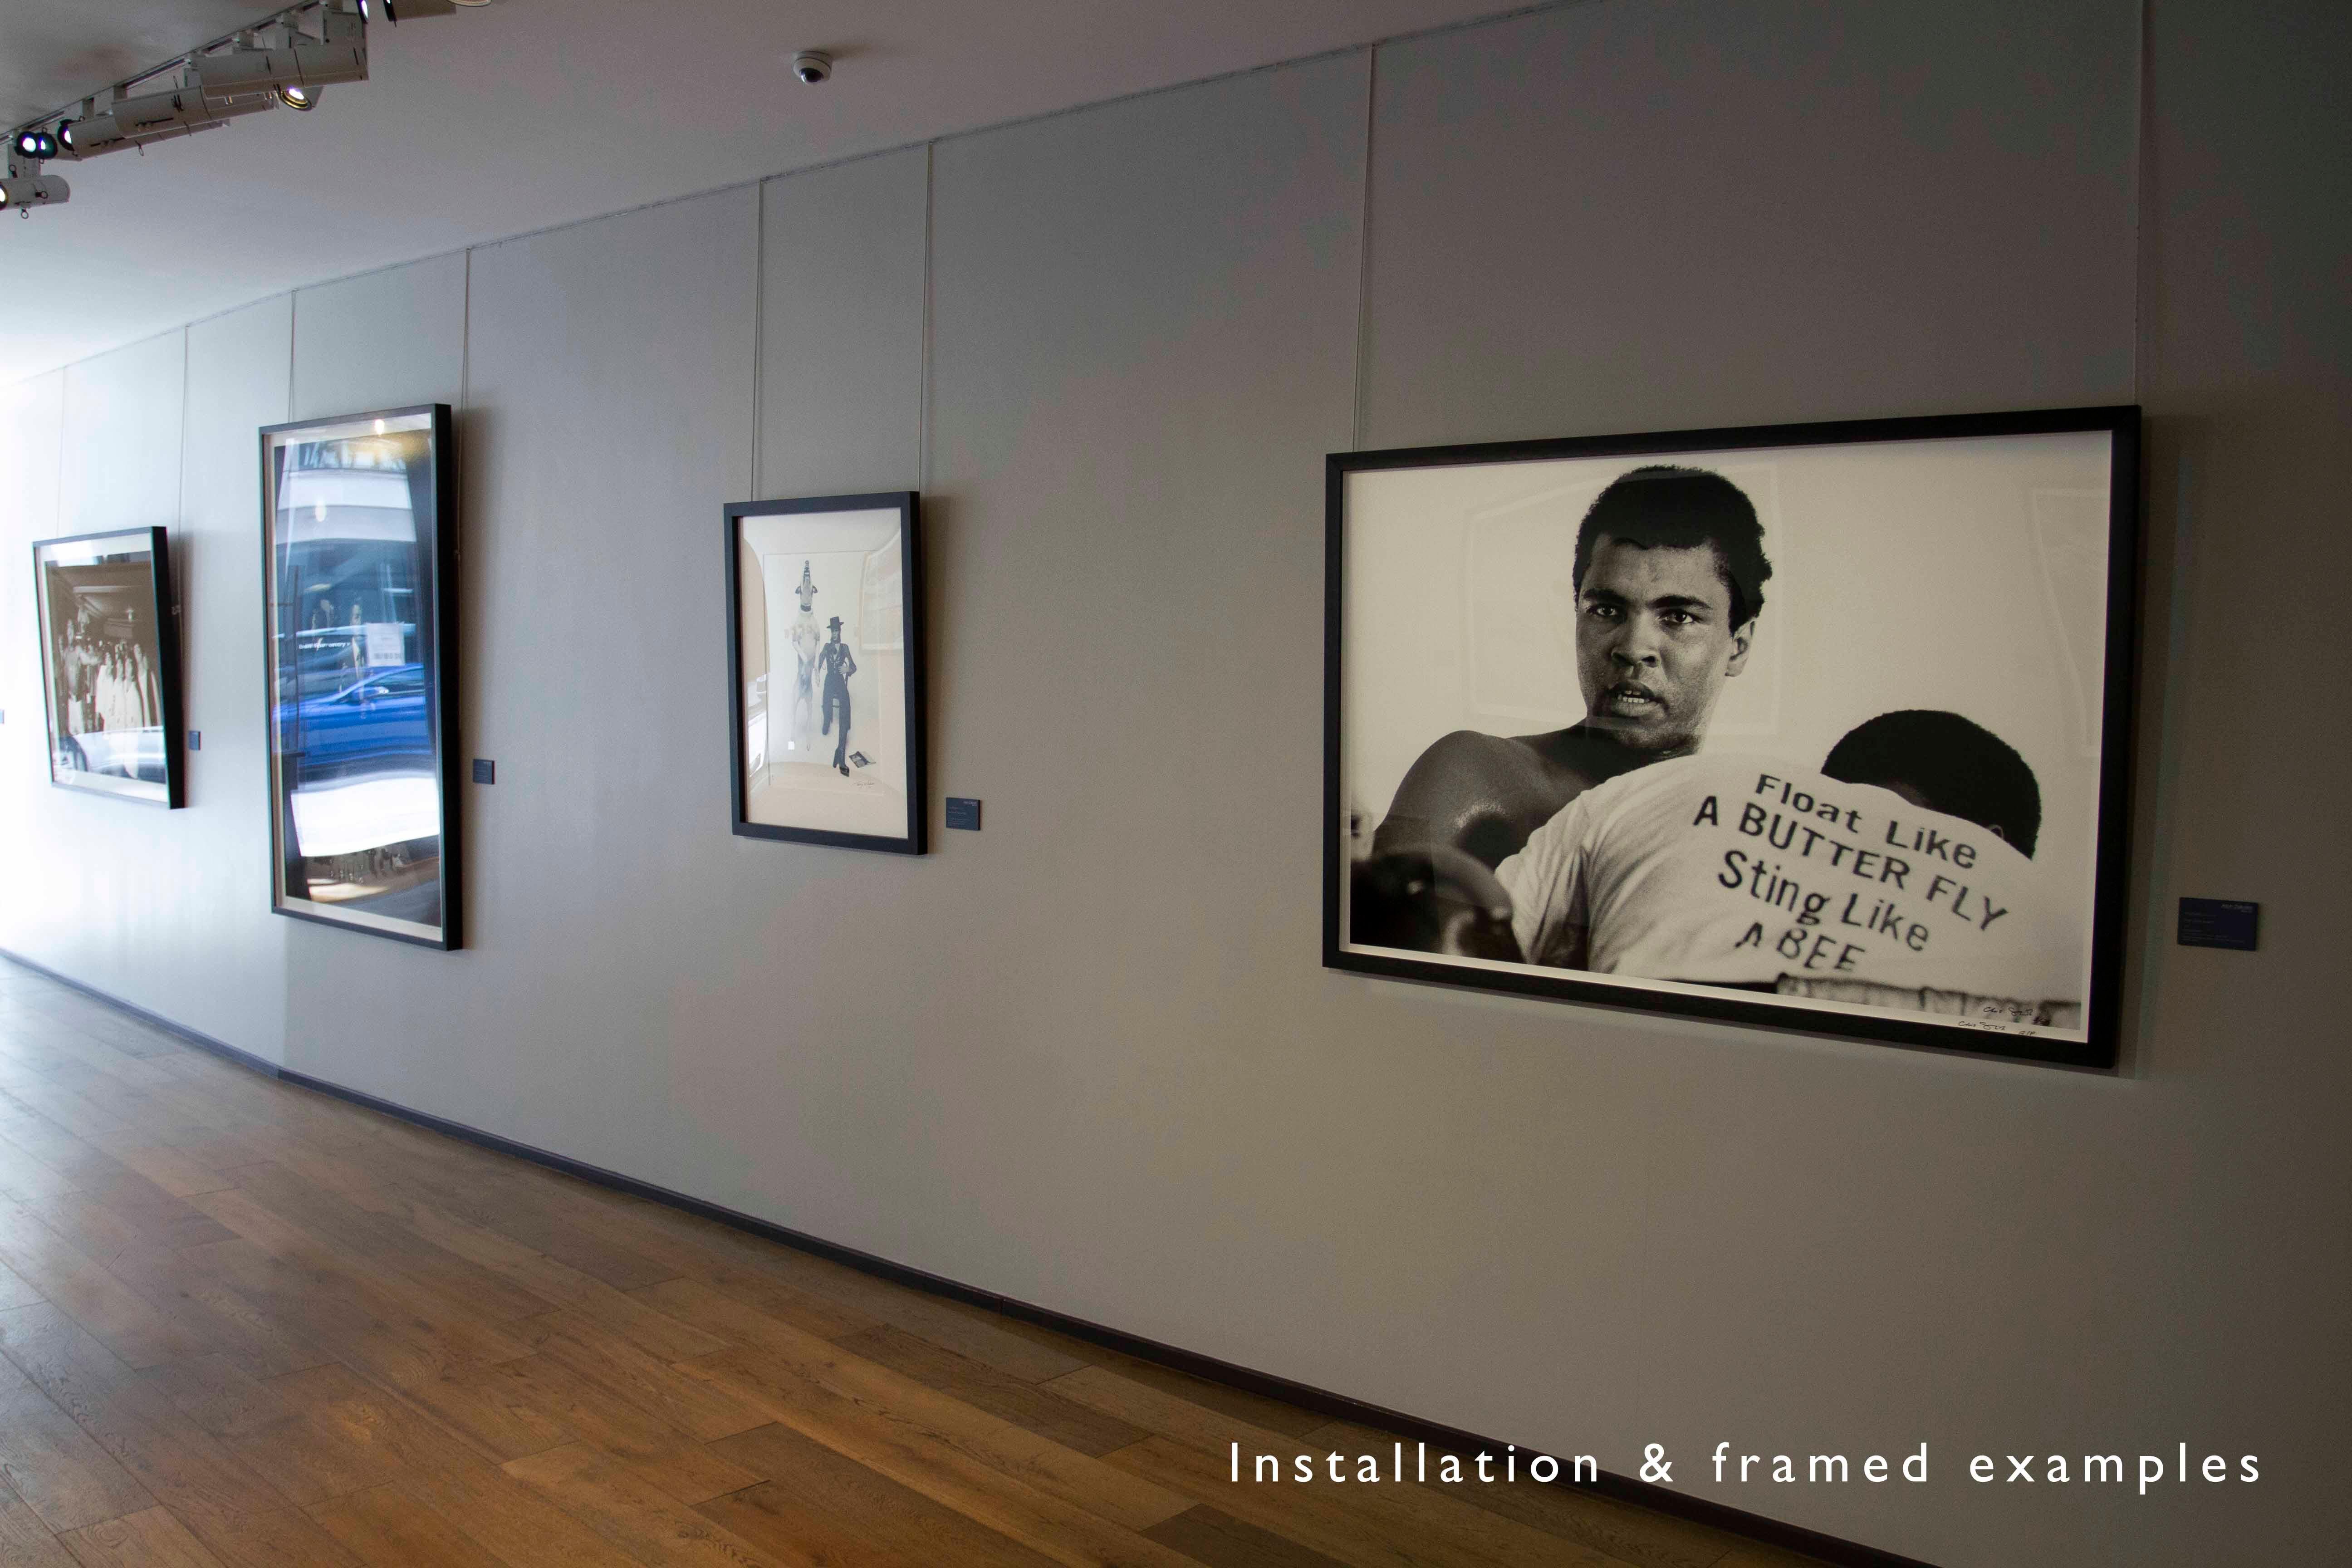 Chris Smith (b.1937)
Ali Versus The Beatles
1964
silver gelatin fibre based print
20 x 30 in. / 34.5 x 48 in. / 46 x 66 in. / 50 x 92 in.
signed and numbered
printed later

This work is available in the following sizes (paper size):
20 x 30 in.,